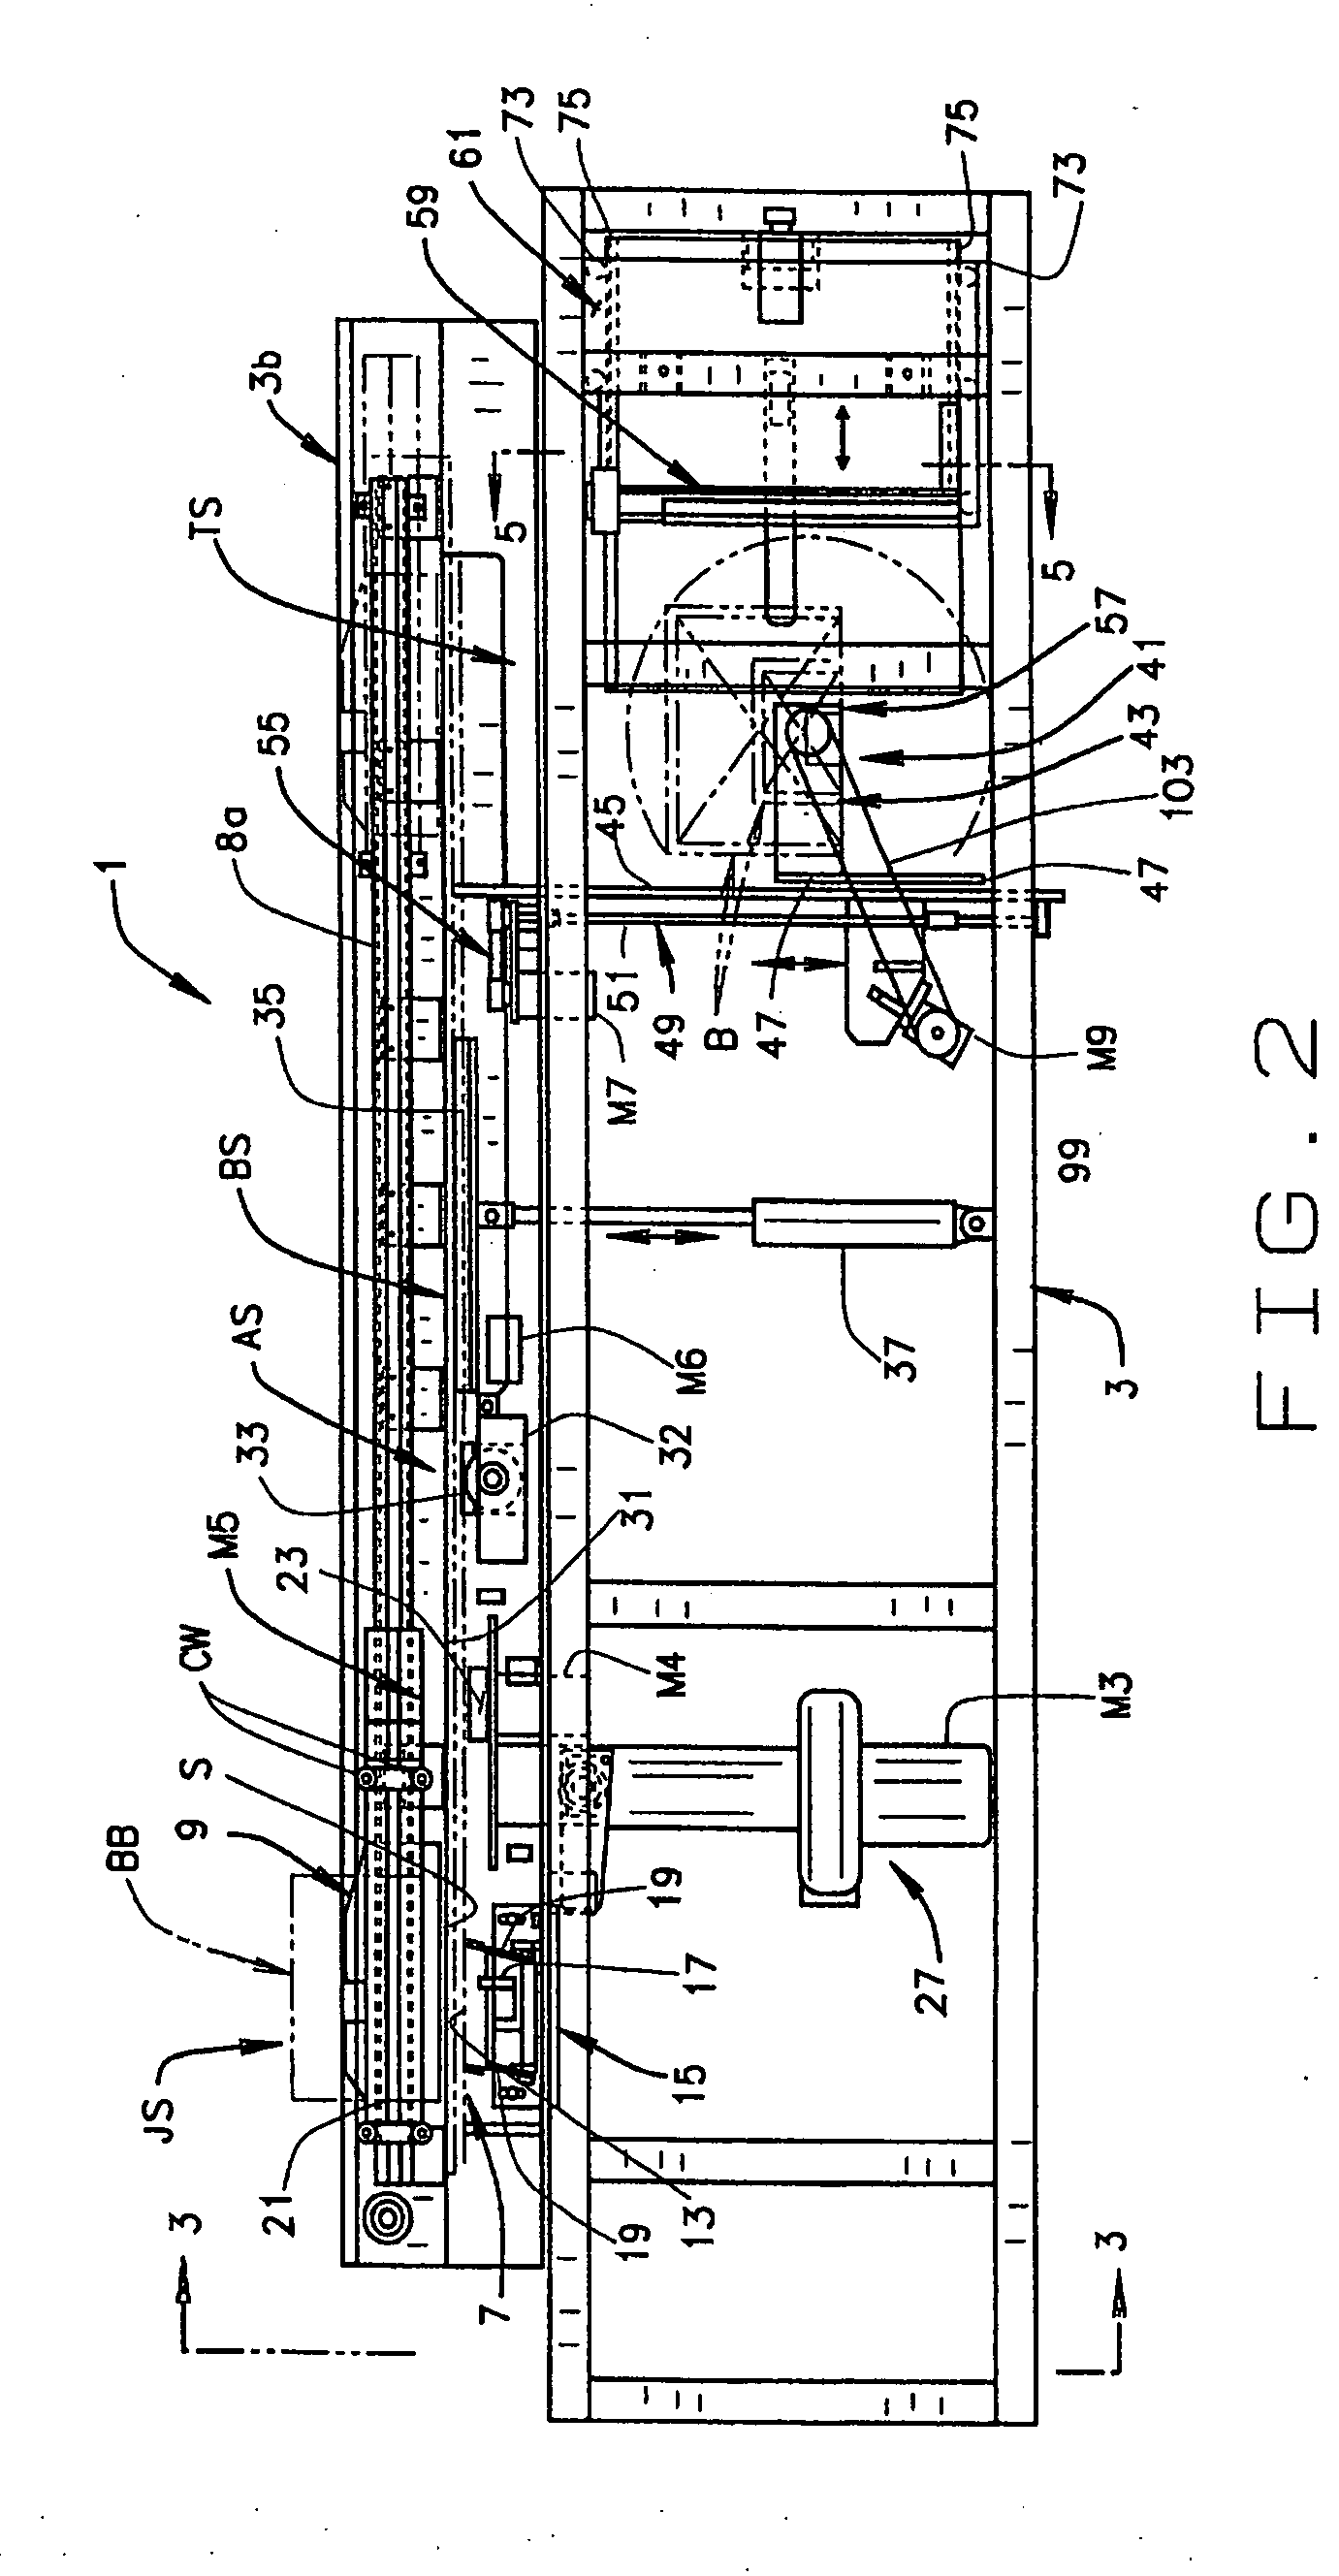 Apparatus and method of on demand printing, binding, and trimming a perfect bound book